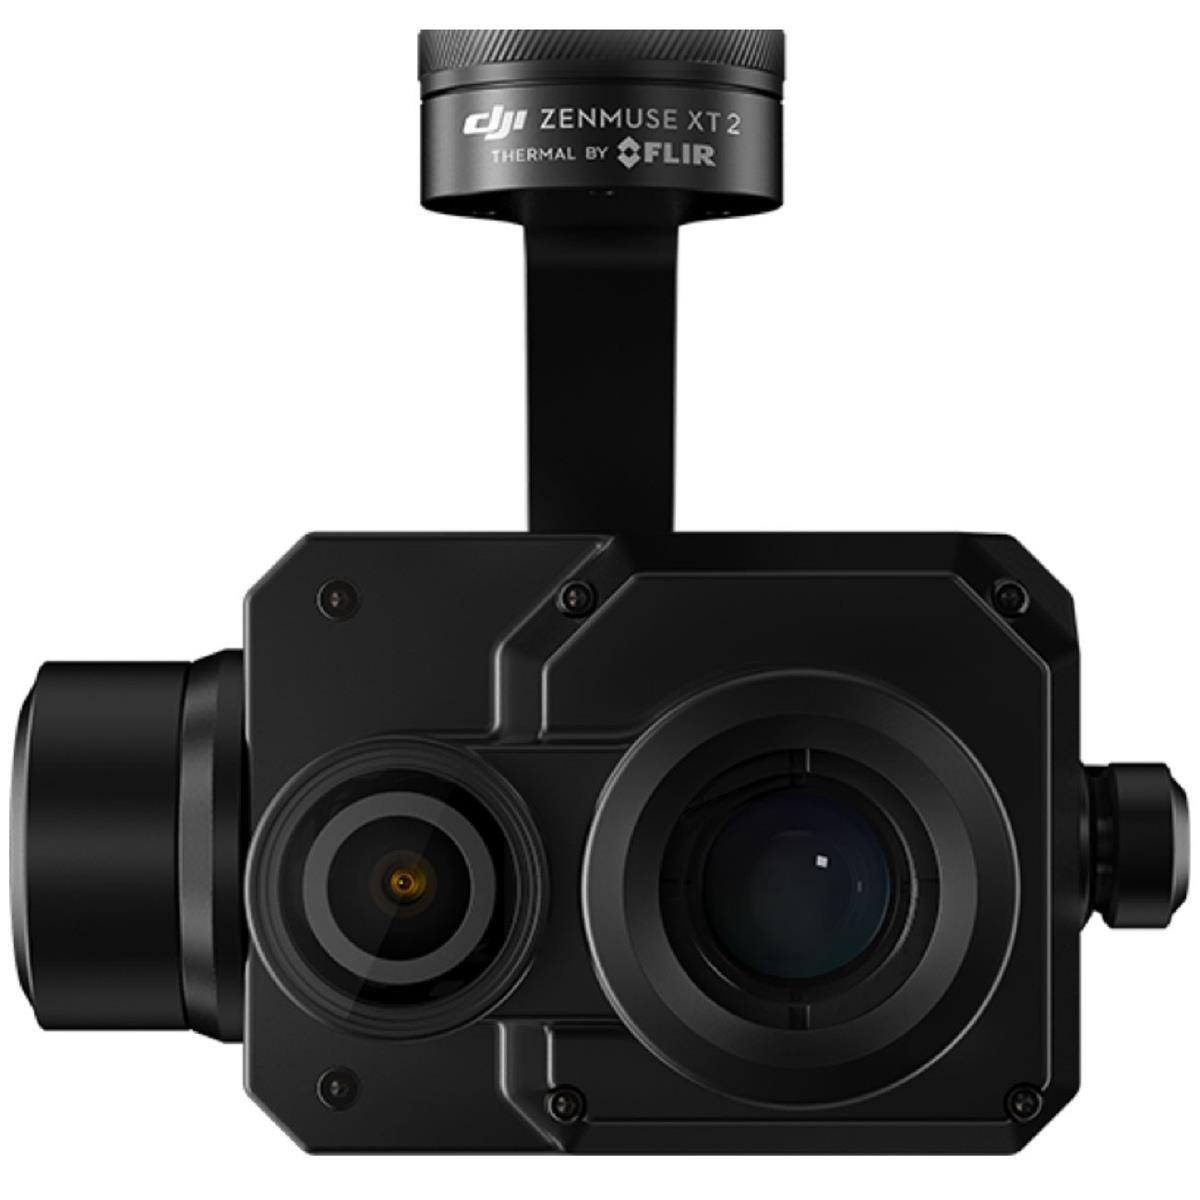 Image of DJI ZENMUSE XT2 Thermal Camera with 13mm Lens